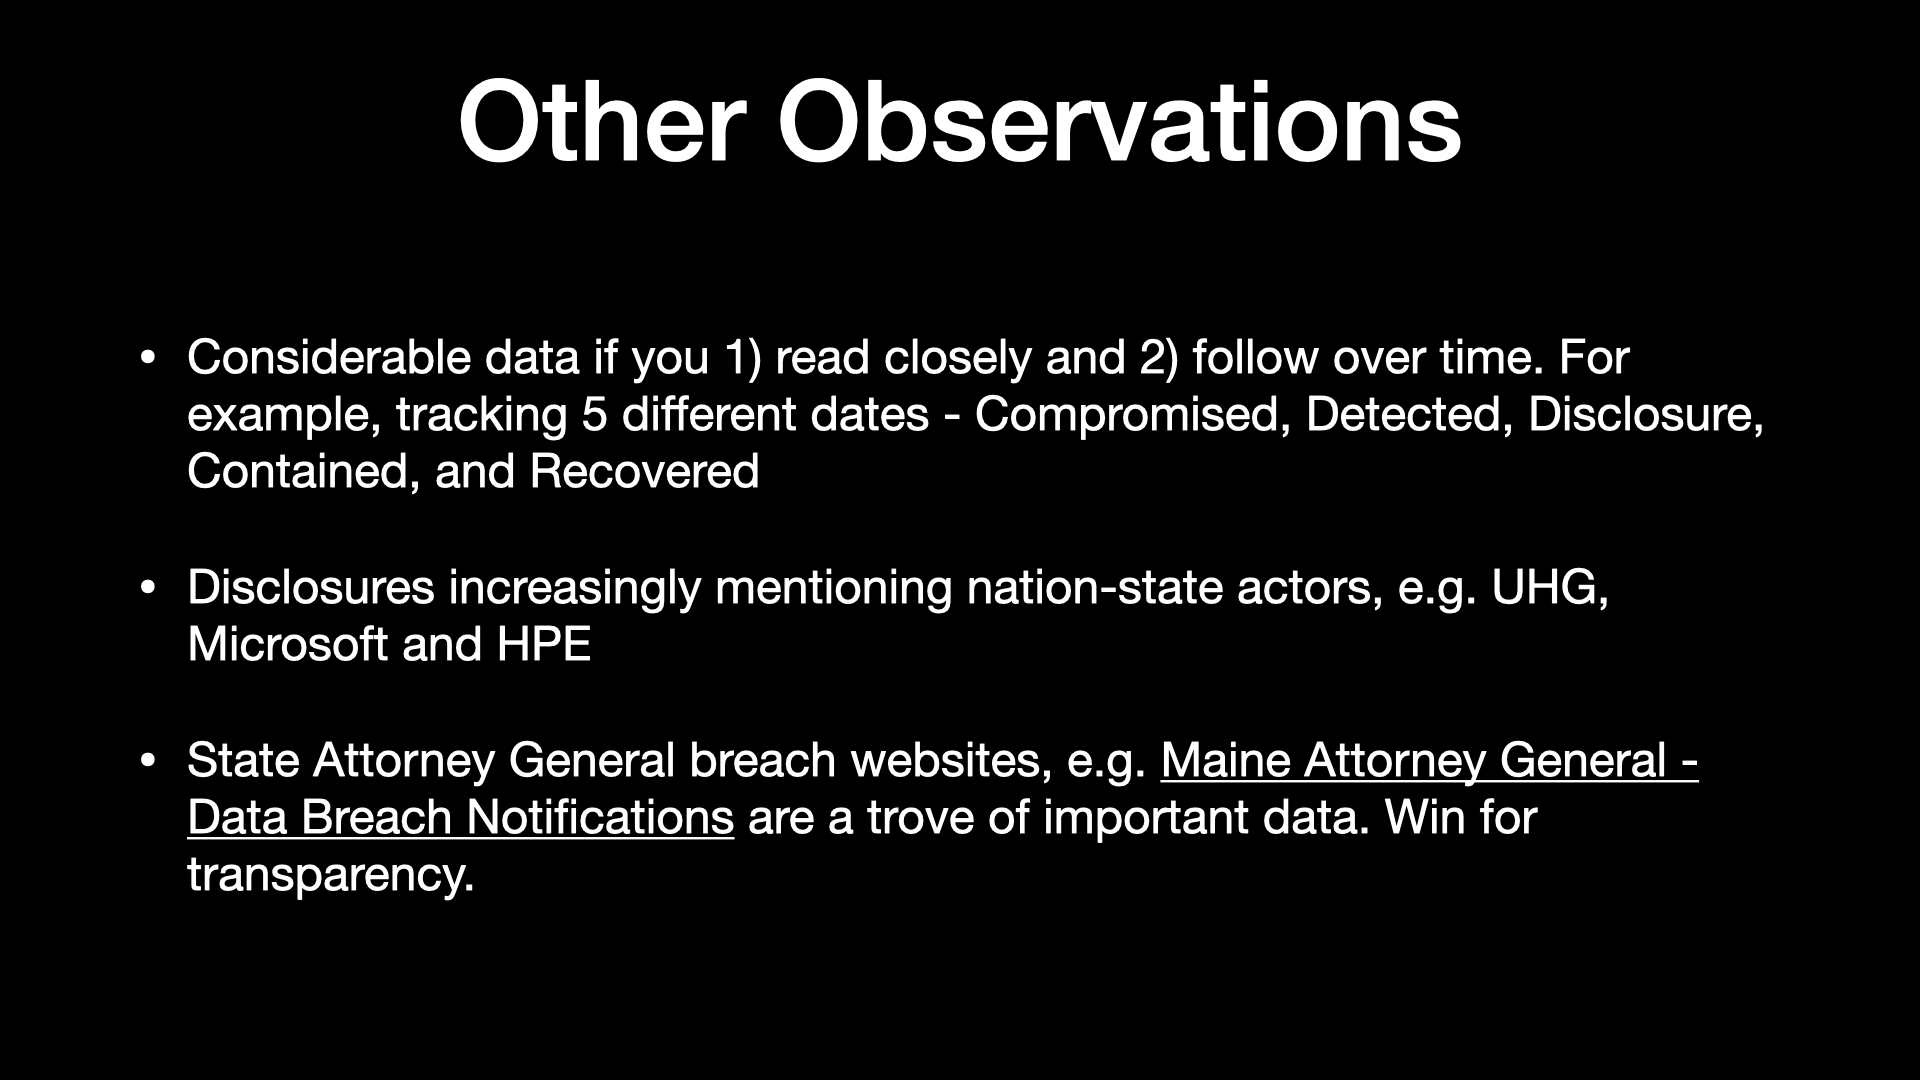 Other observations  » Considerable data if you 1) read closely and 2) follow over time. For example, tracking 5 different dates - Compromised, Detected, Disclosure, Contained, and Recovered   Disclosures increasingly mentioning nation-state actors, e.g. UHG, Microsoft and HPE  » State Attorney General breach websites, e.g. Maine Attorney General - Data Breach Notifications are a trove of important data. Win for transparency. 